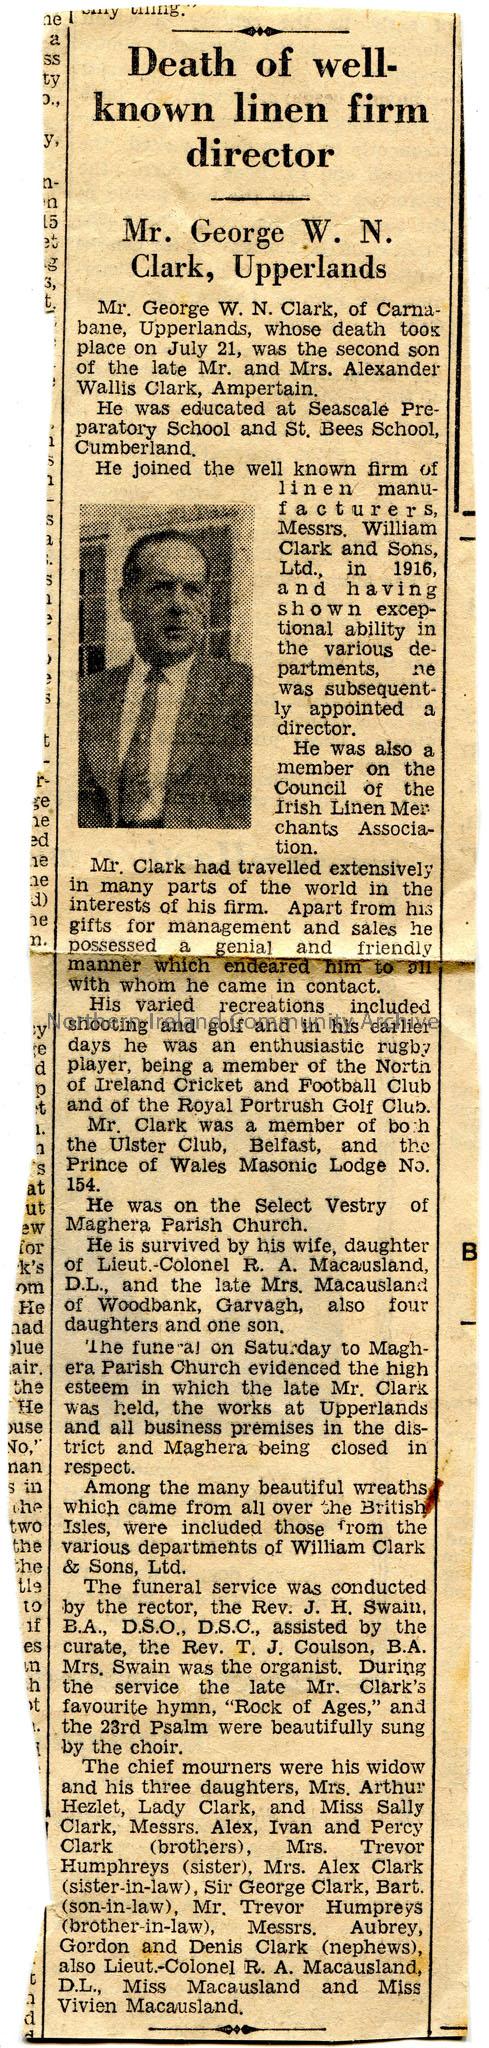 Newspaper cutting of an obituary titled, “Death of well-known linen firm director, Mr. George W. N. Clark, Upperlands”. He died 21st July and the fune…